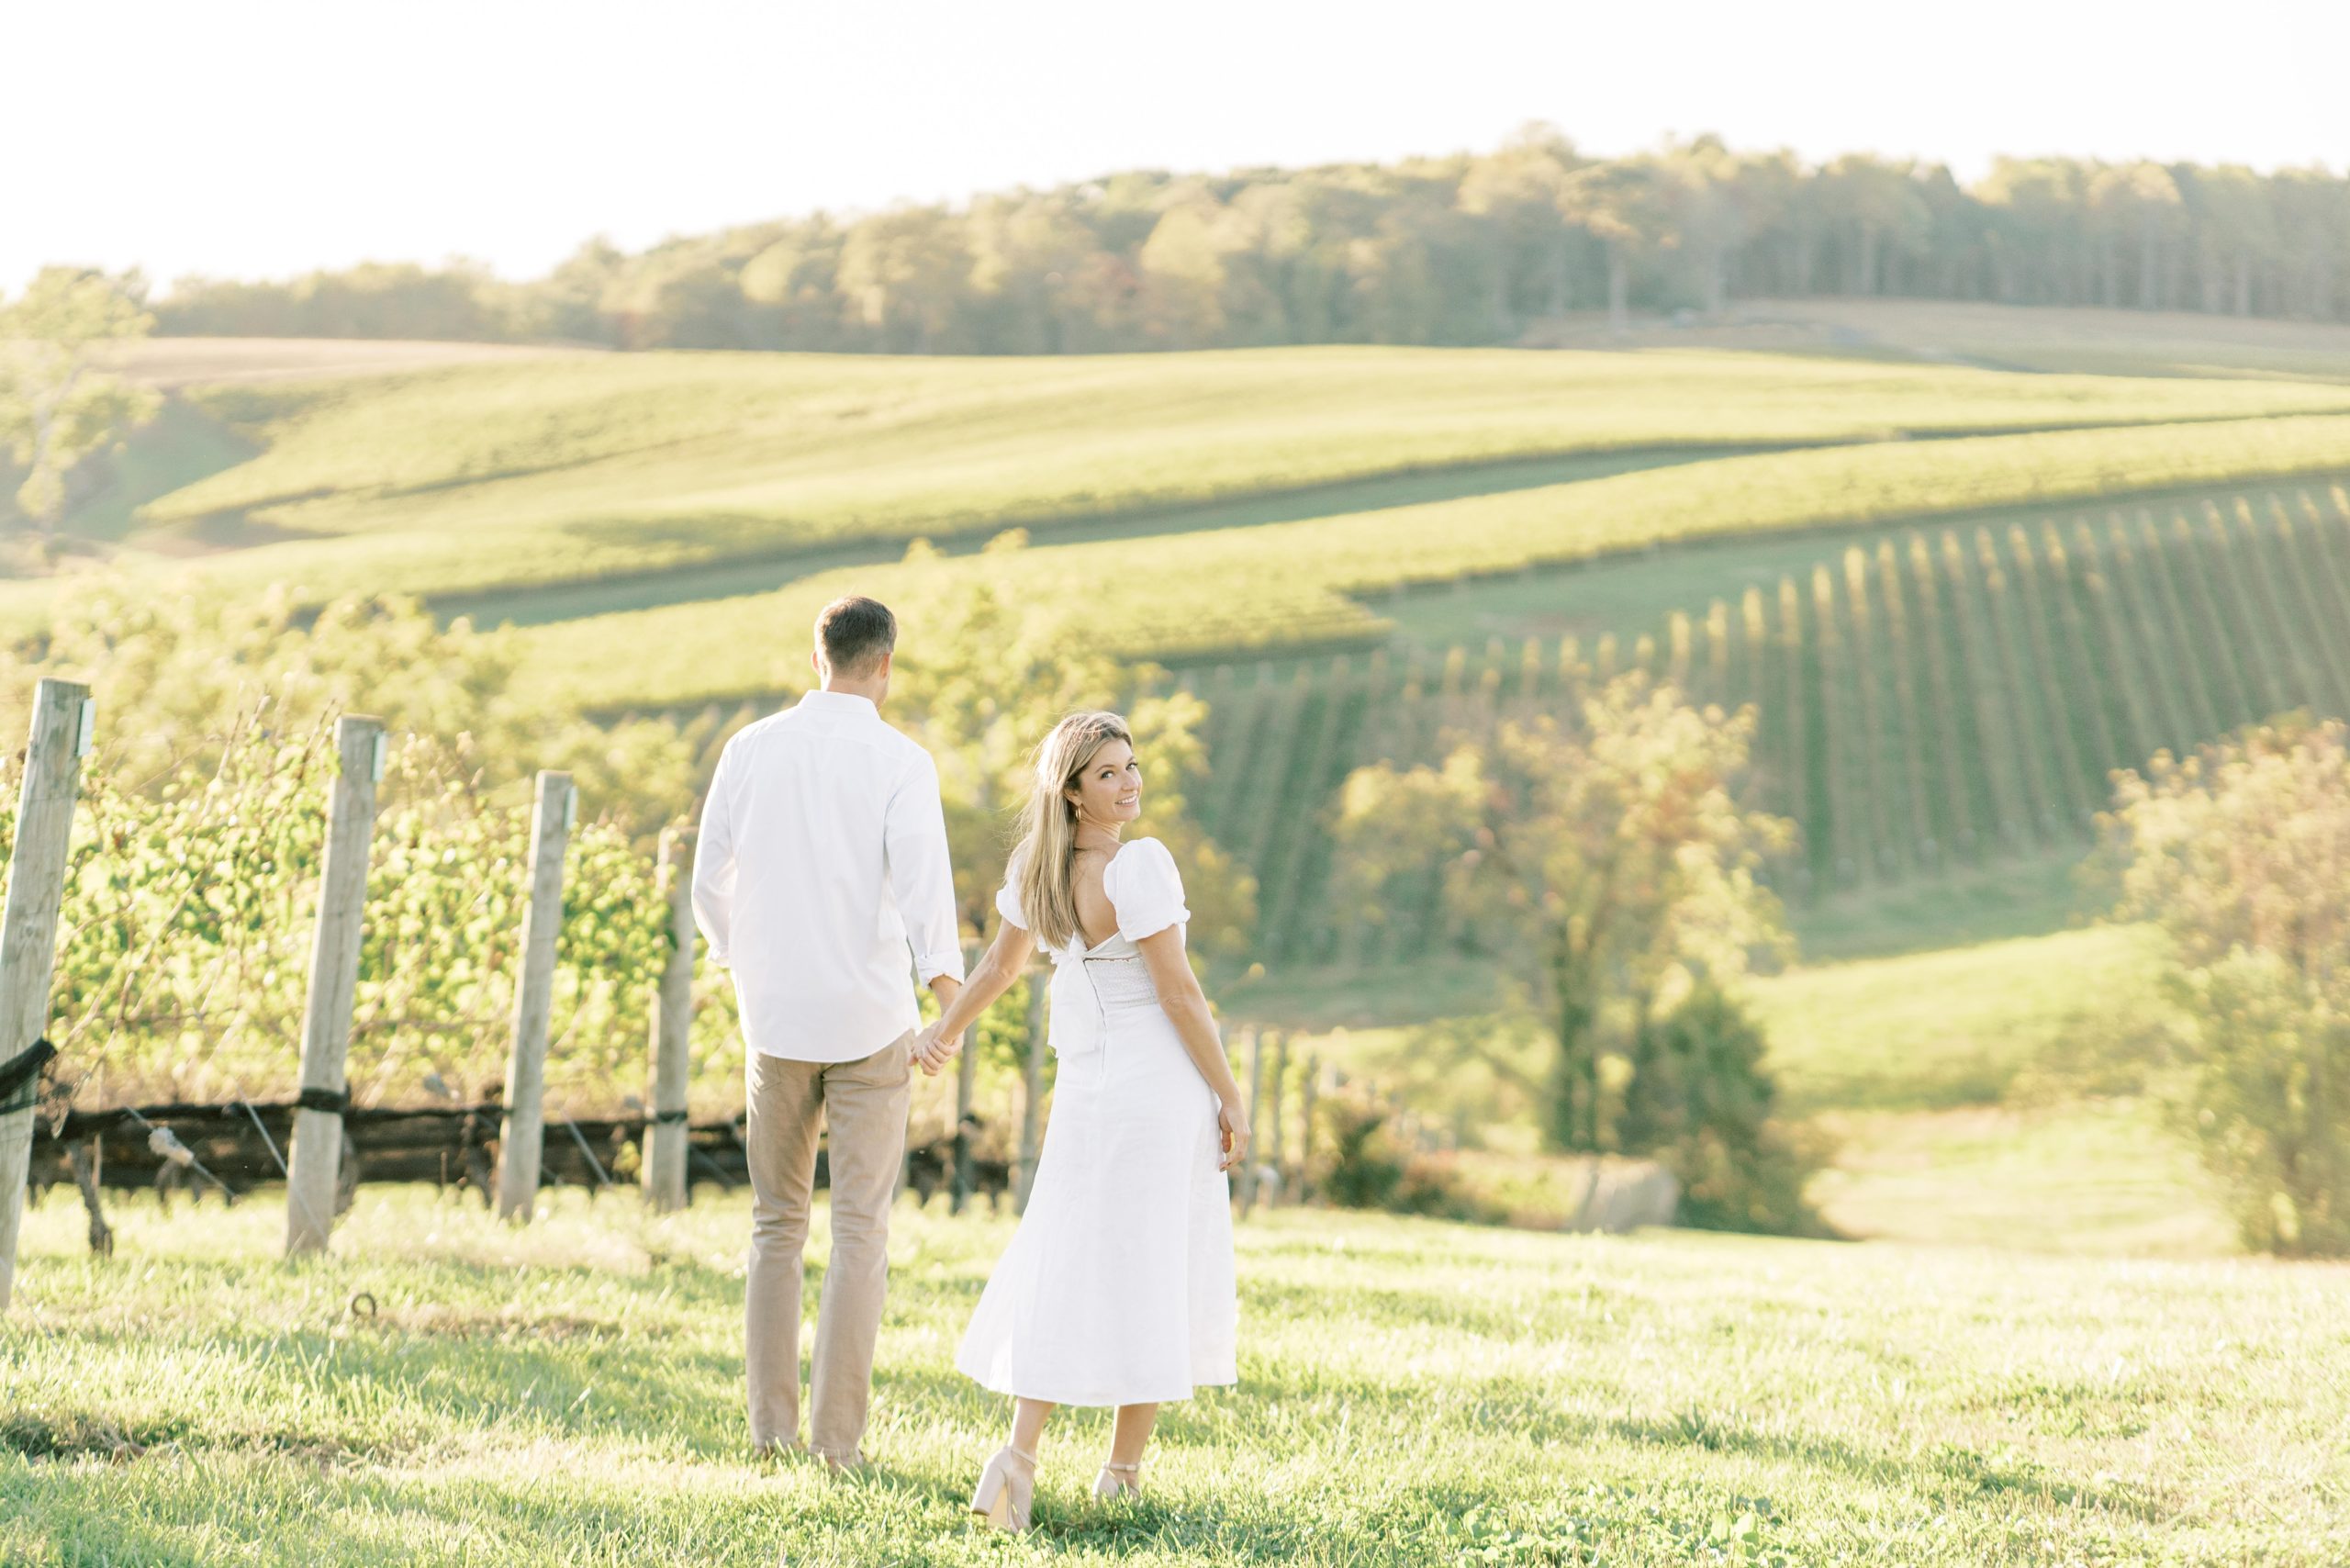 A golden hour engagement session at one of Virginia's most stunning vineyards, Stone Tower Winery, in Leesburg, VA.